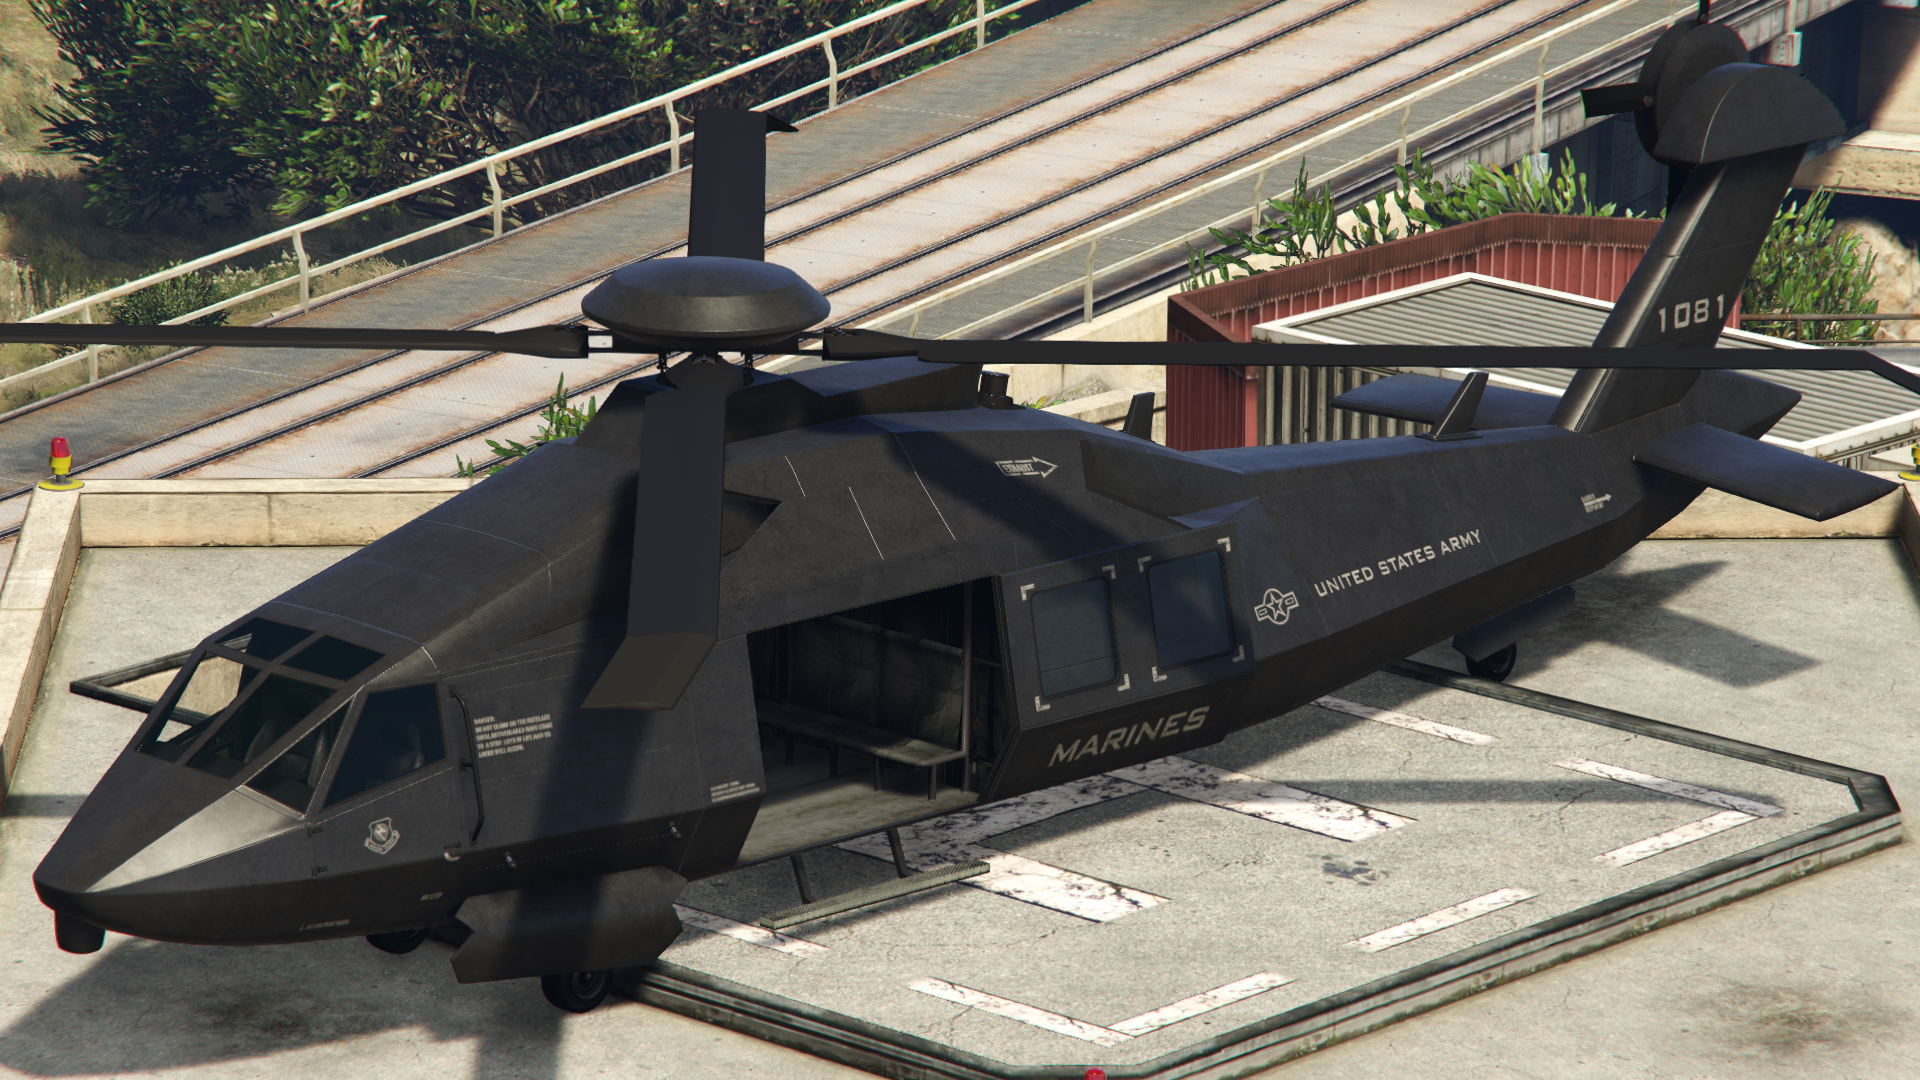 are there helicopters in first island of gta 4